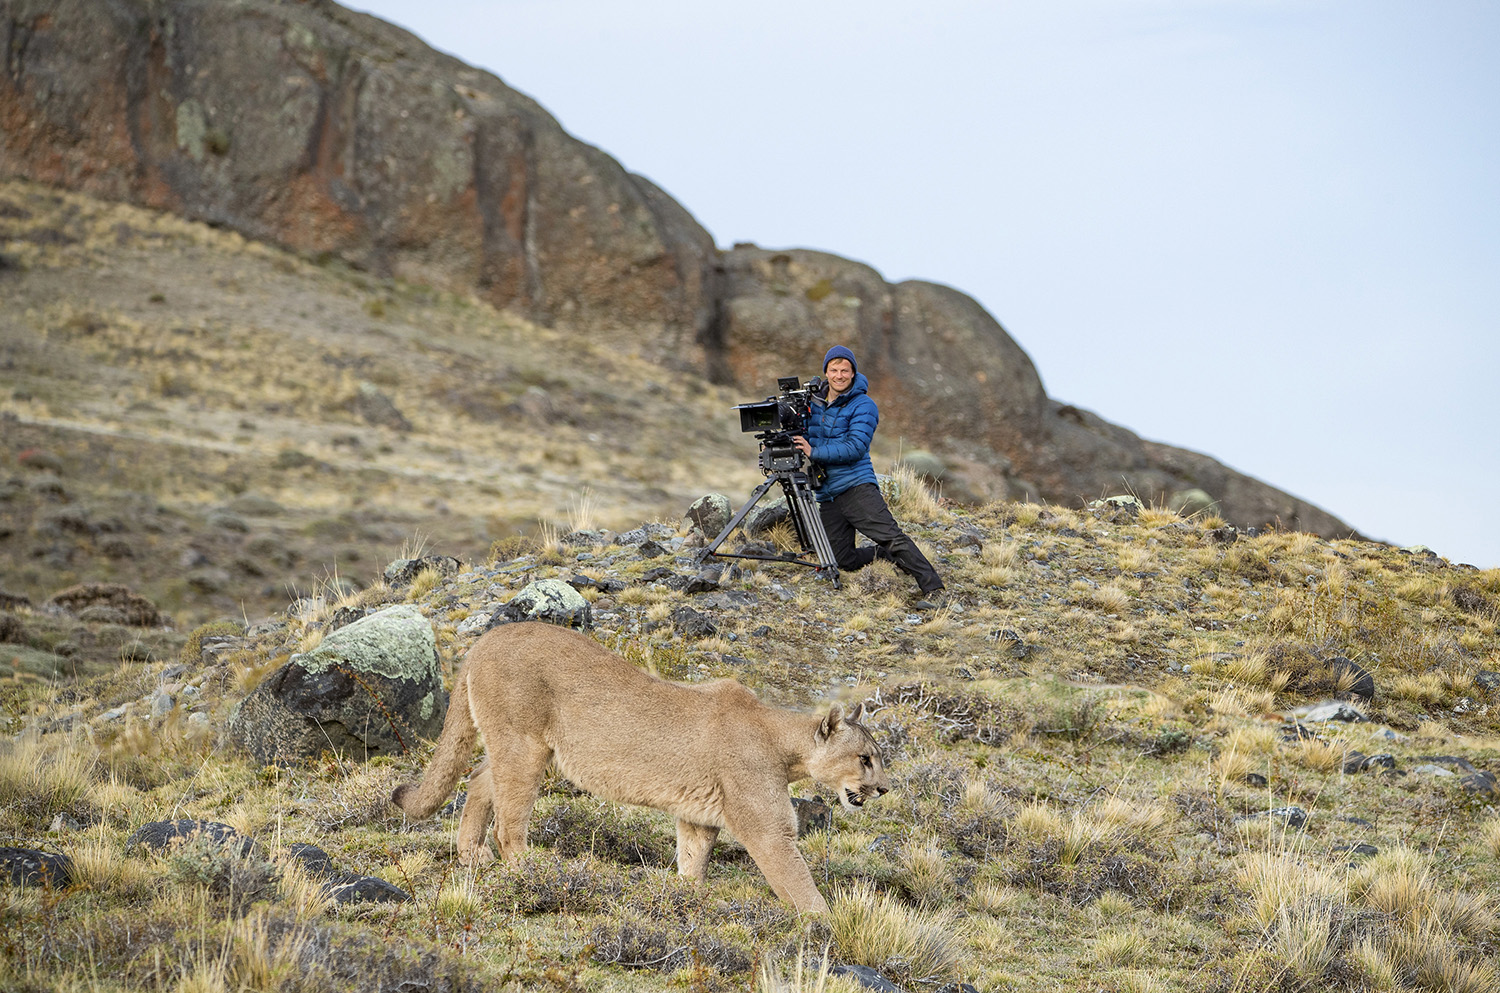 Bertie Gregory filming a puma walking past in the foreground.